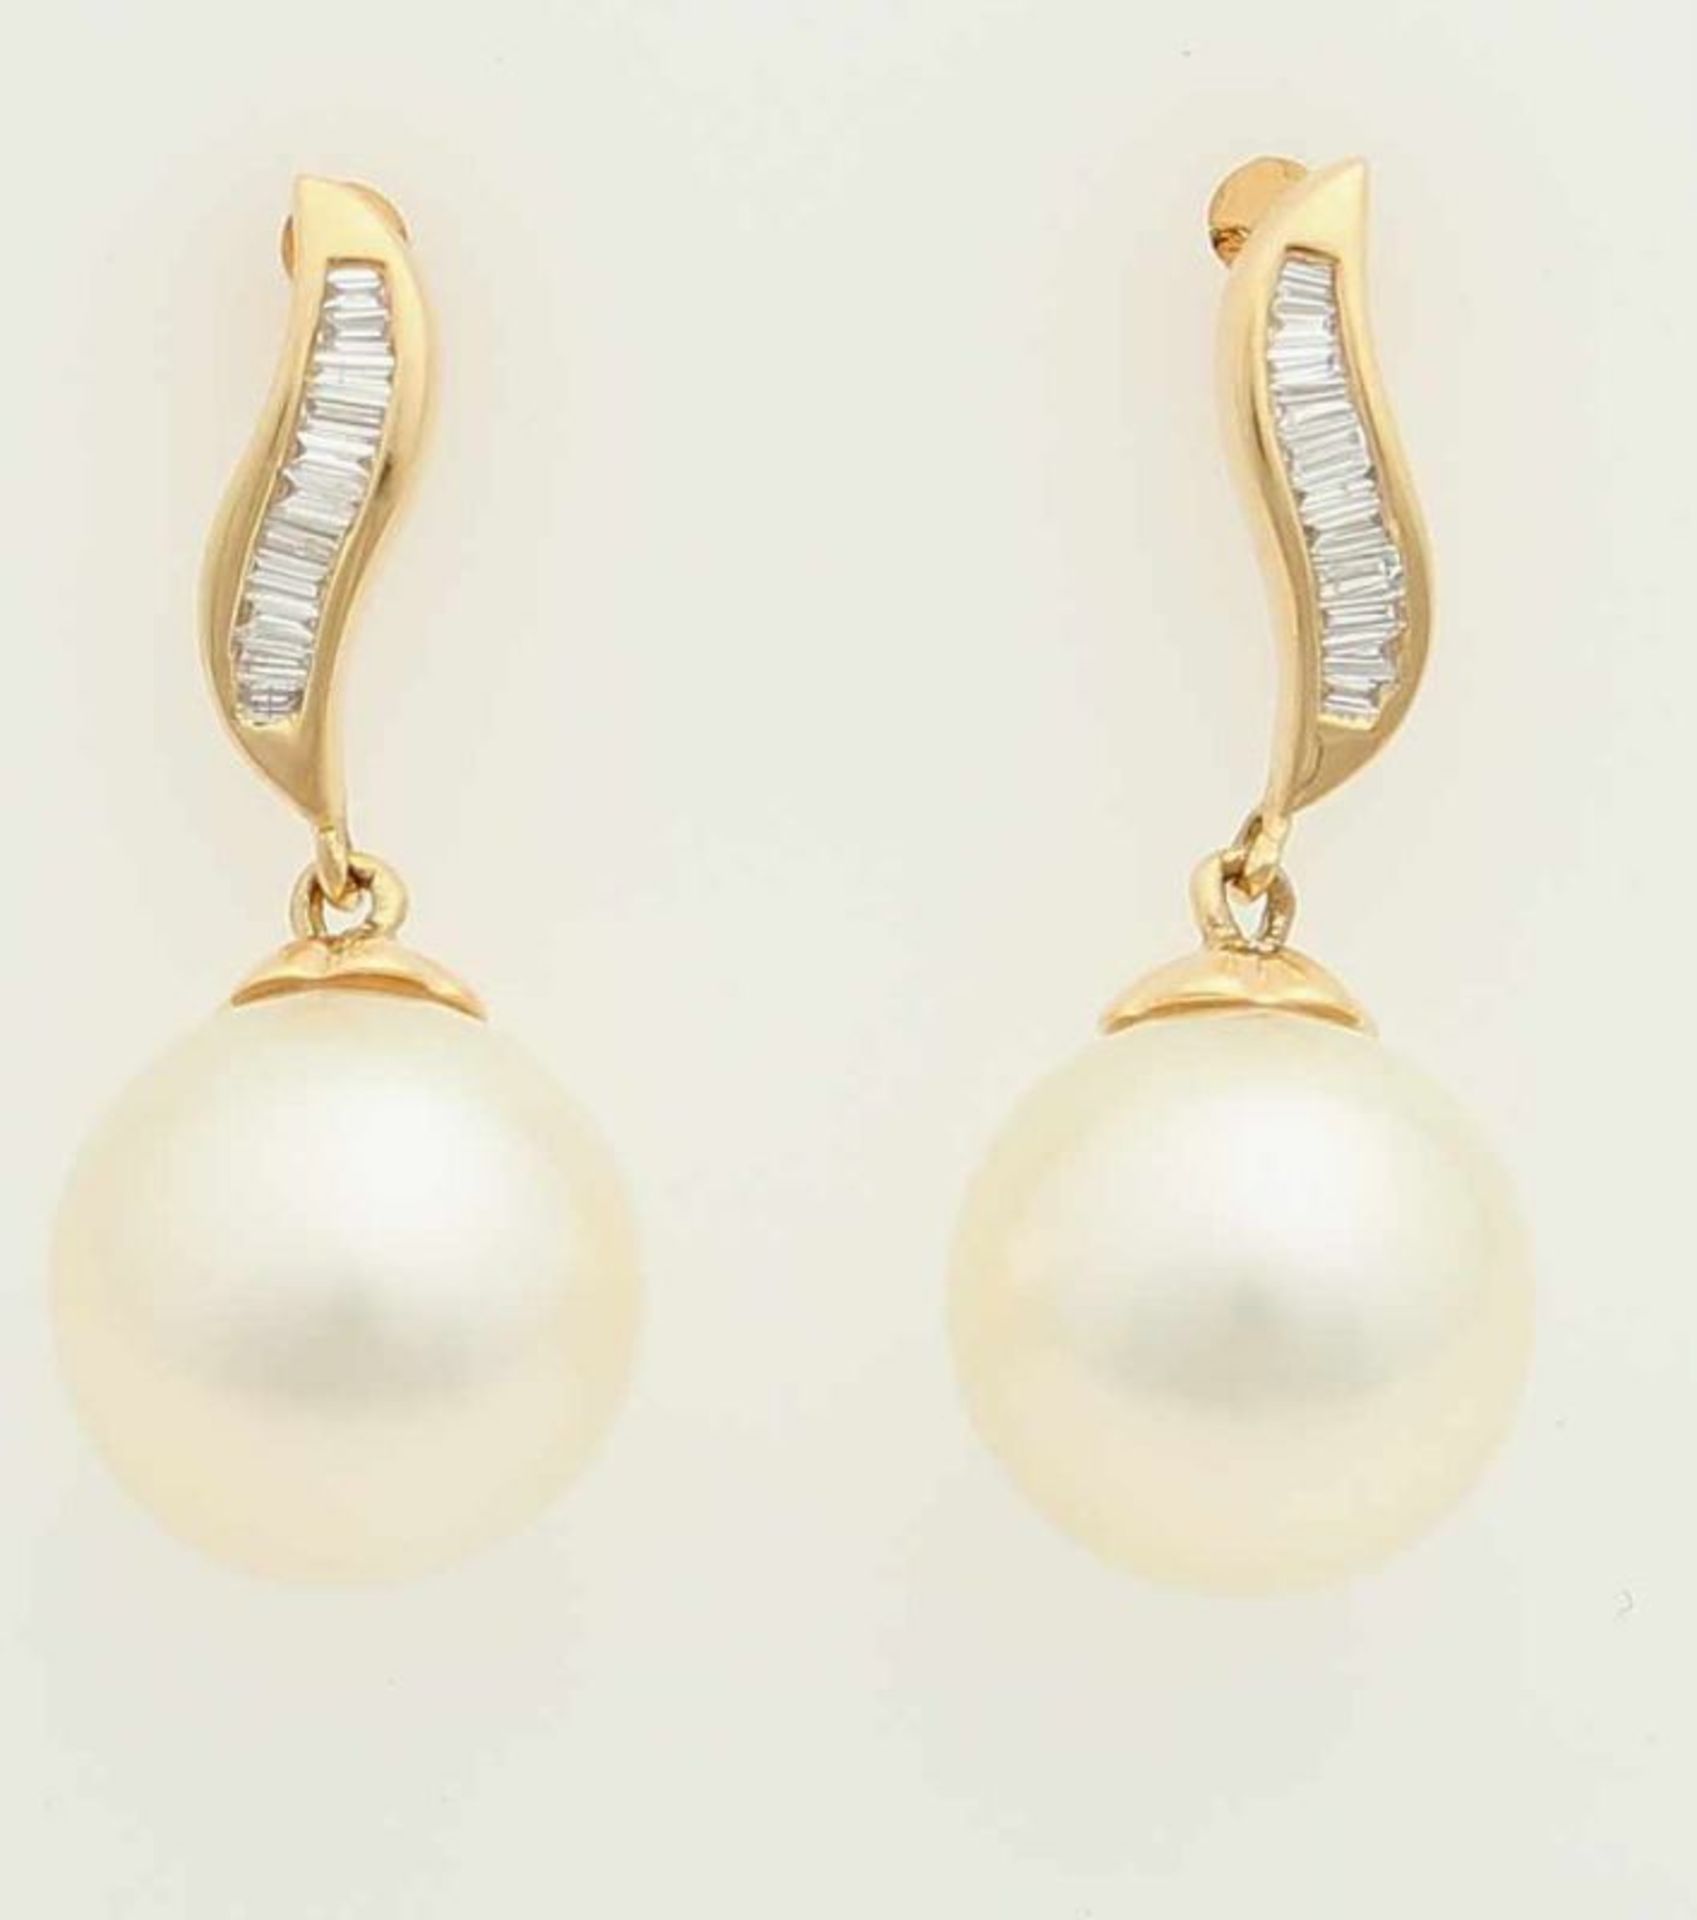 Yellow gold earrings, 750/000 with diam ant and pearl.Ear studs with a stroke containing 21 baquette